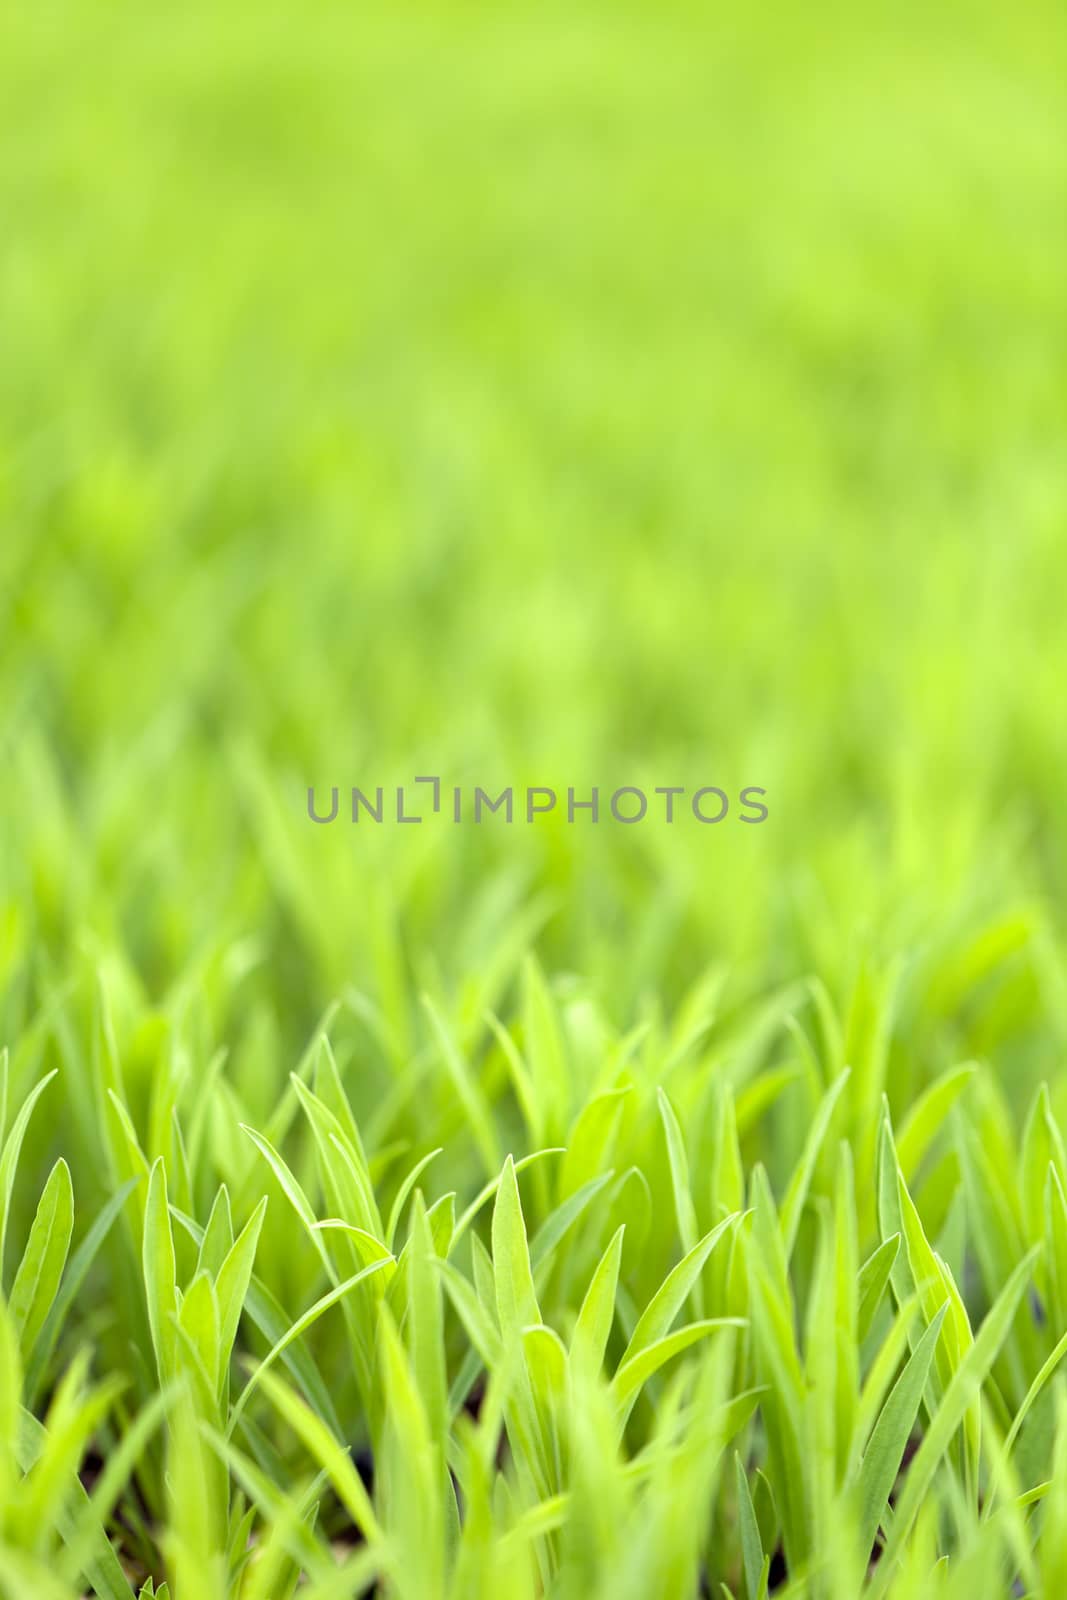 Grassy green grass or plant foliage close up.  Shallow depth of field.